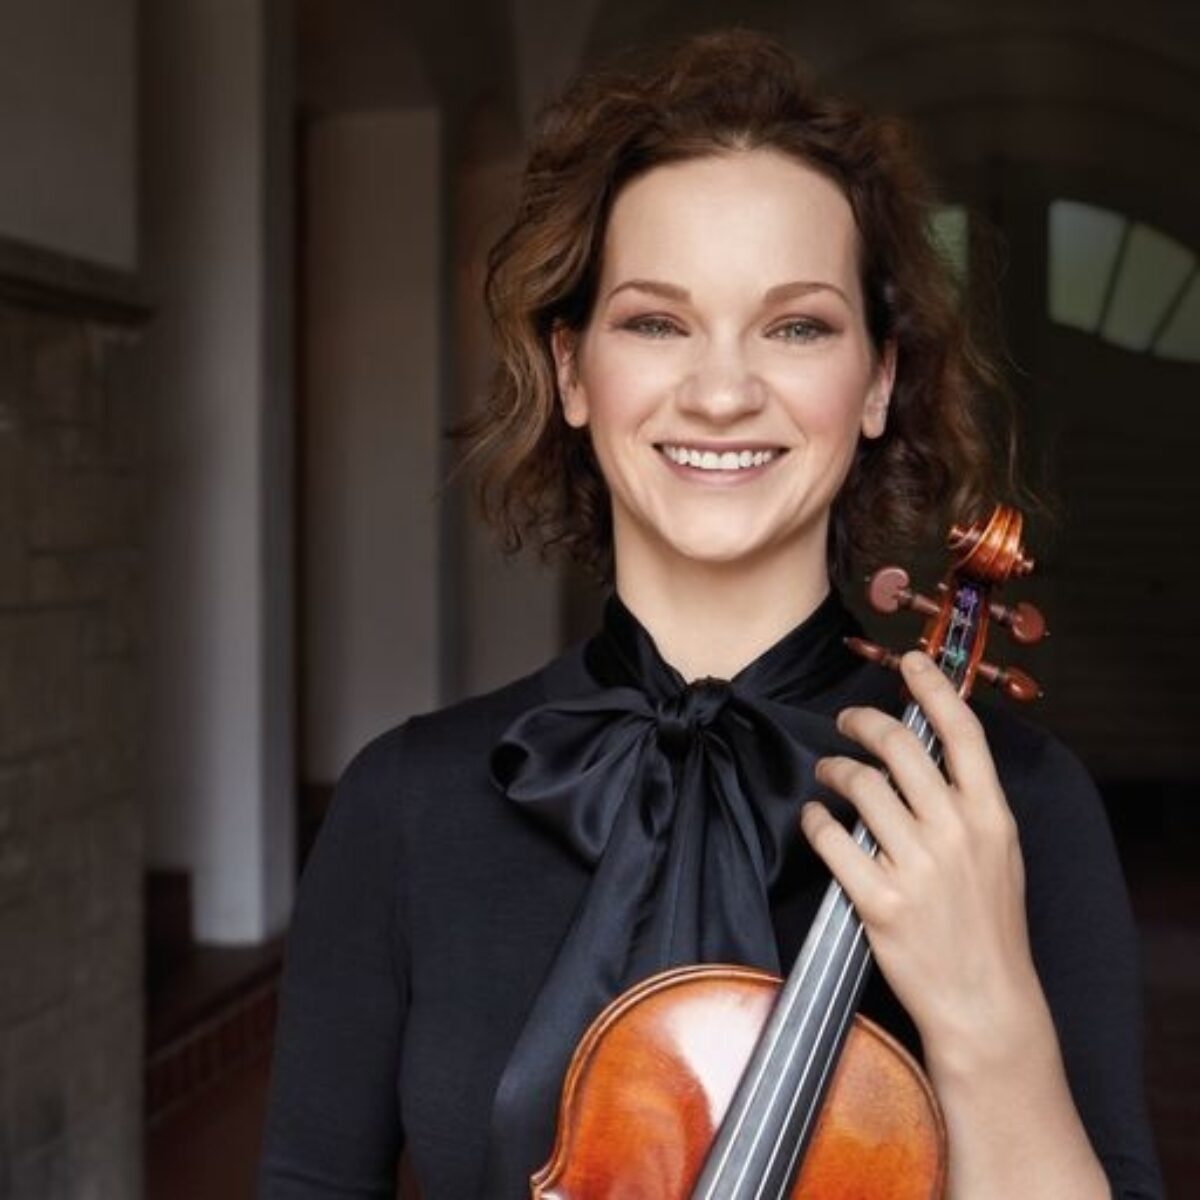 Hilary Hahn smiling directly ahead while holding a violin close to her body